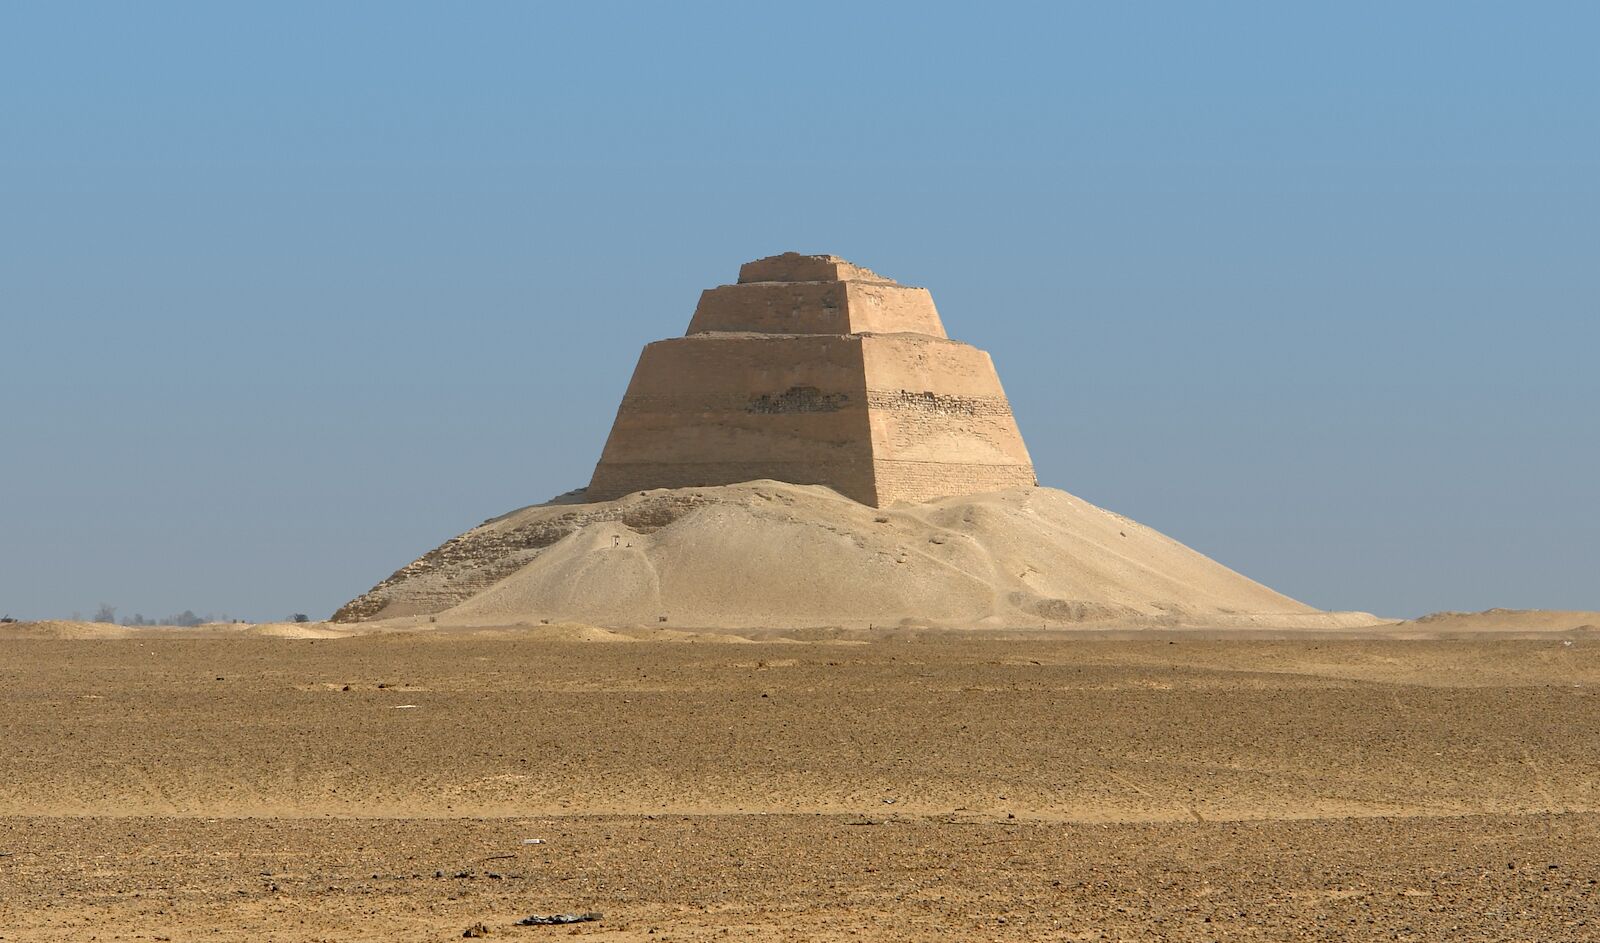 Meidum Pyramid. What's inside this pyramid?